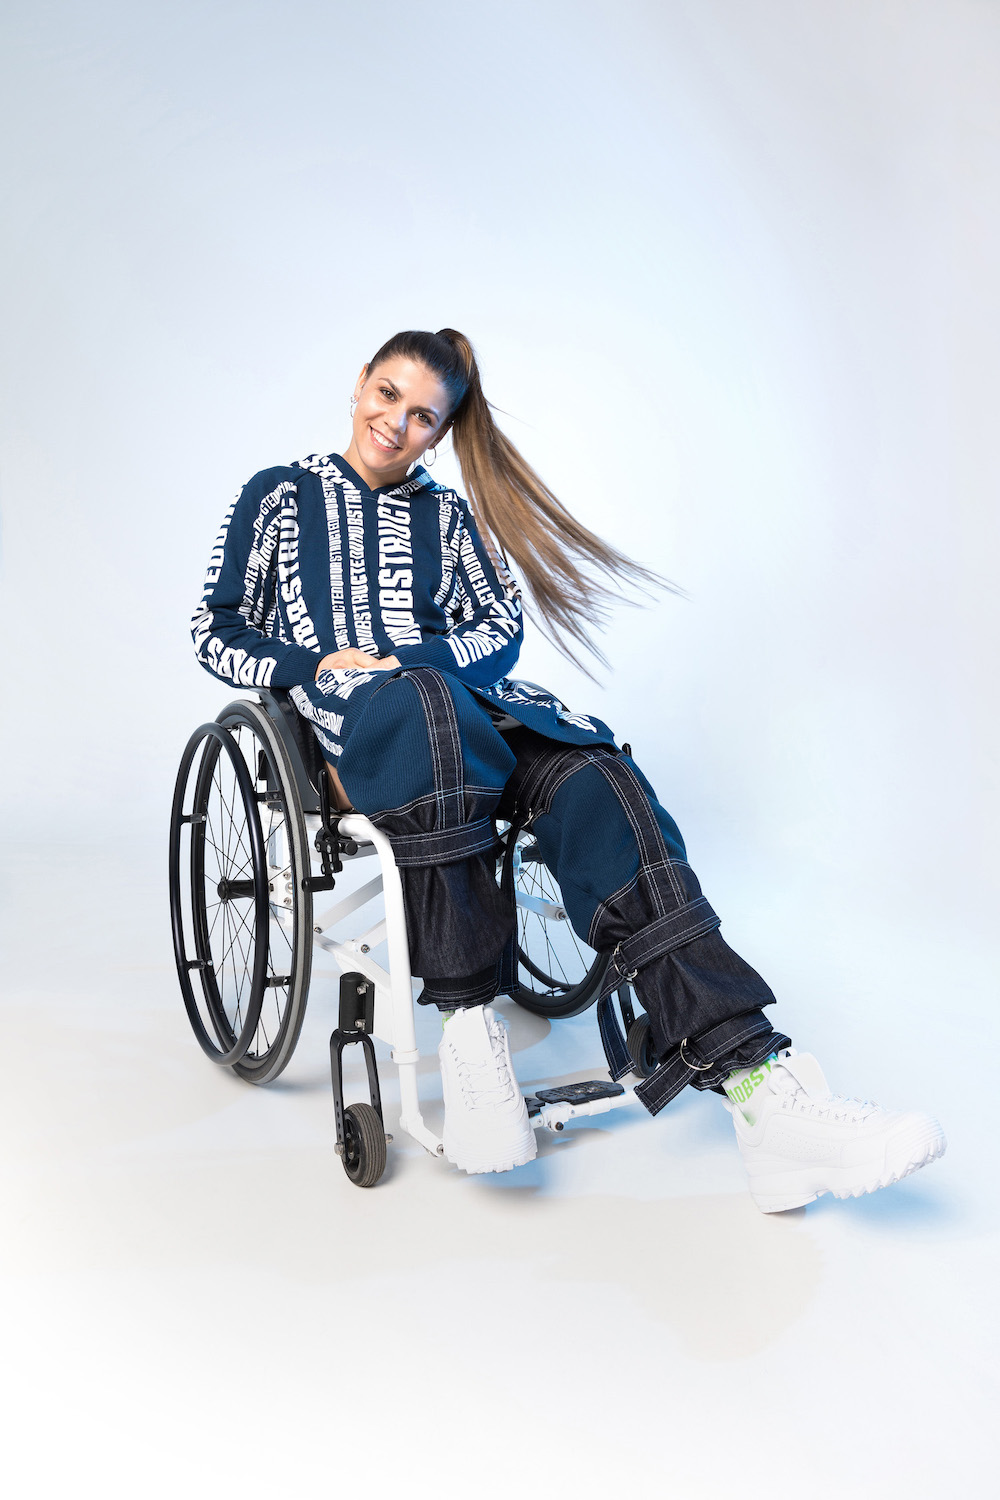 Amarila Veres, pro-wheelchair fencer and Paralympian